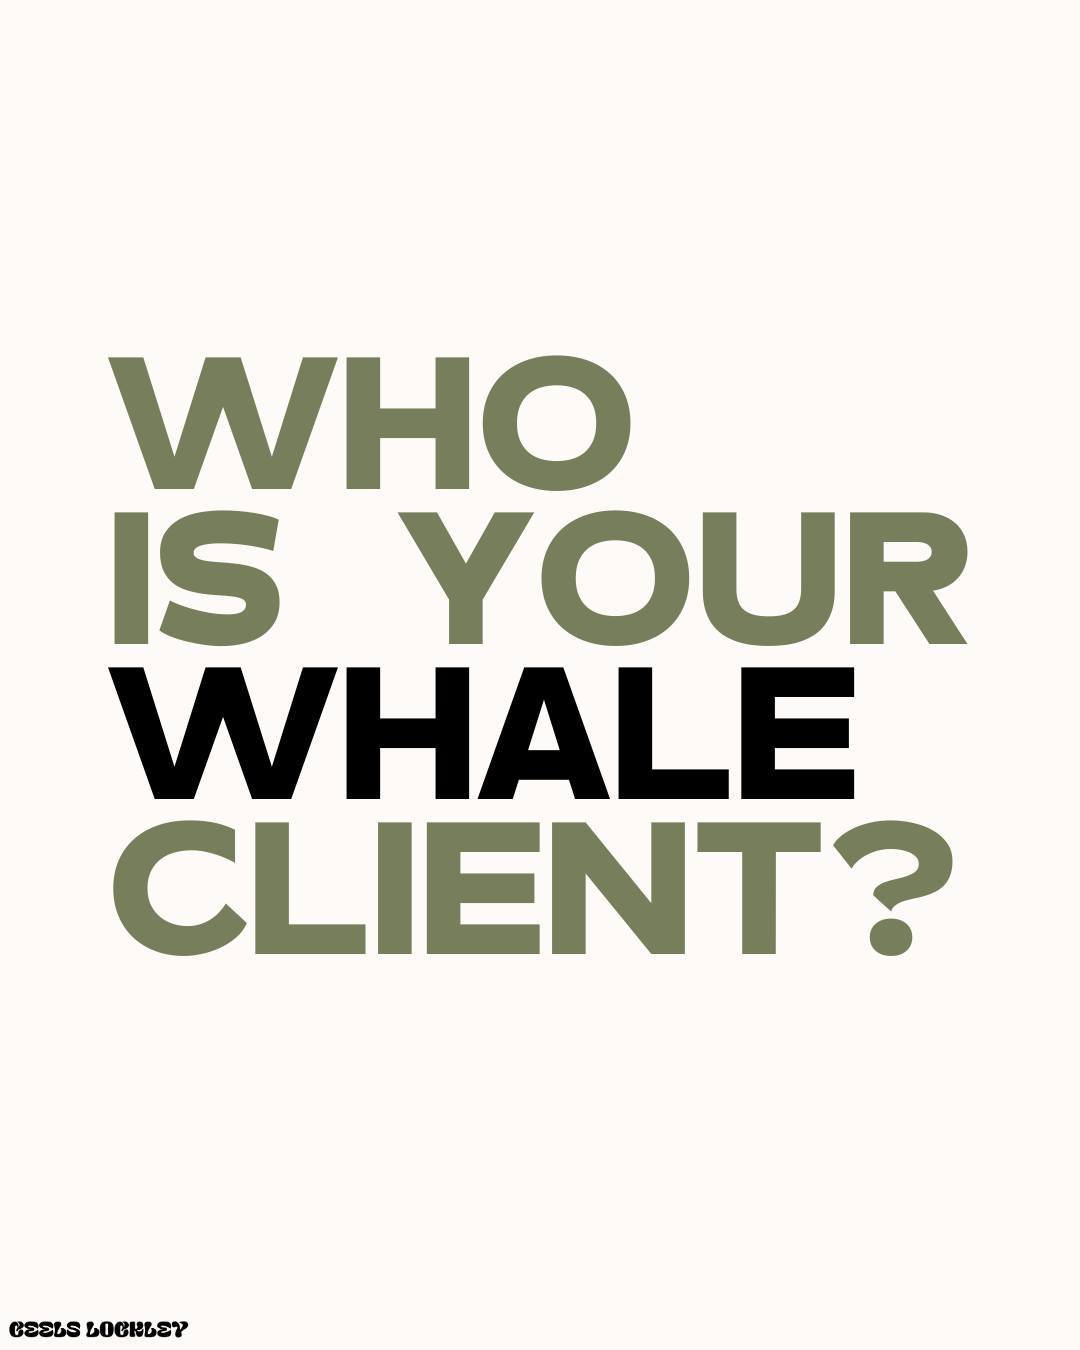 Your co-dependent whale client is likely one of the first ever clients who helped your business get off the ground. 🐳⁠
⁠
We call them a whale client because they make up the largest chunk of your income. ⁠
⁠
Essentially, you&rsquo;re in a codependen